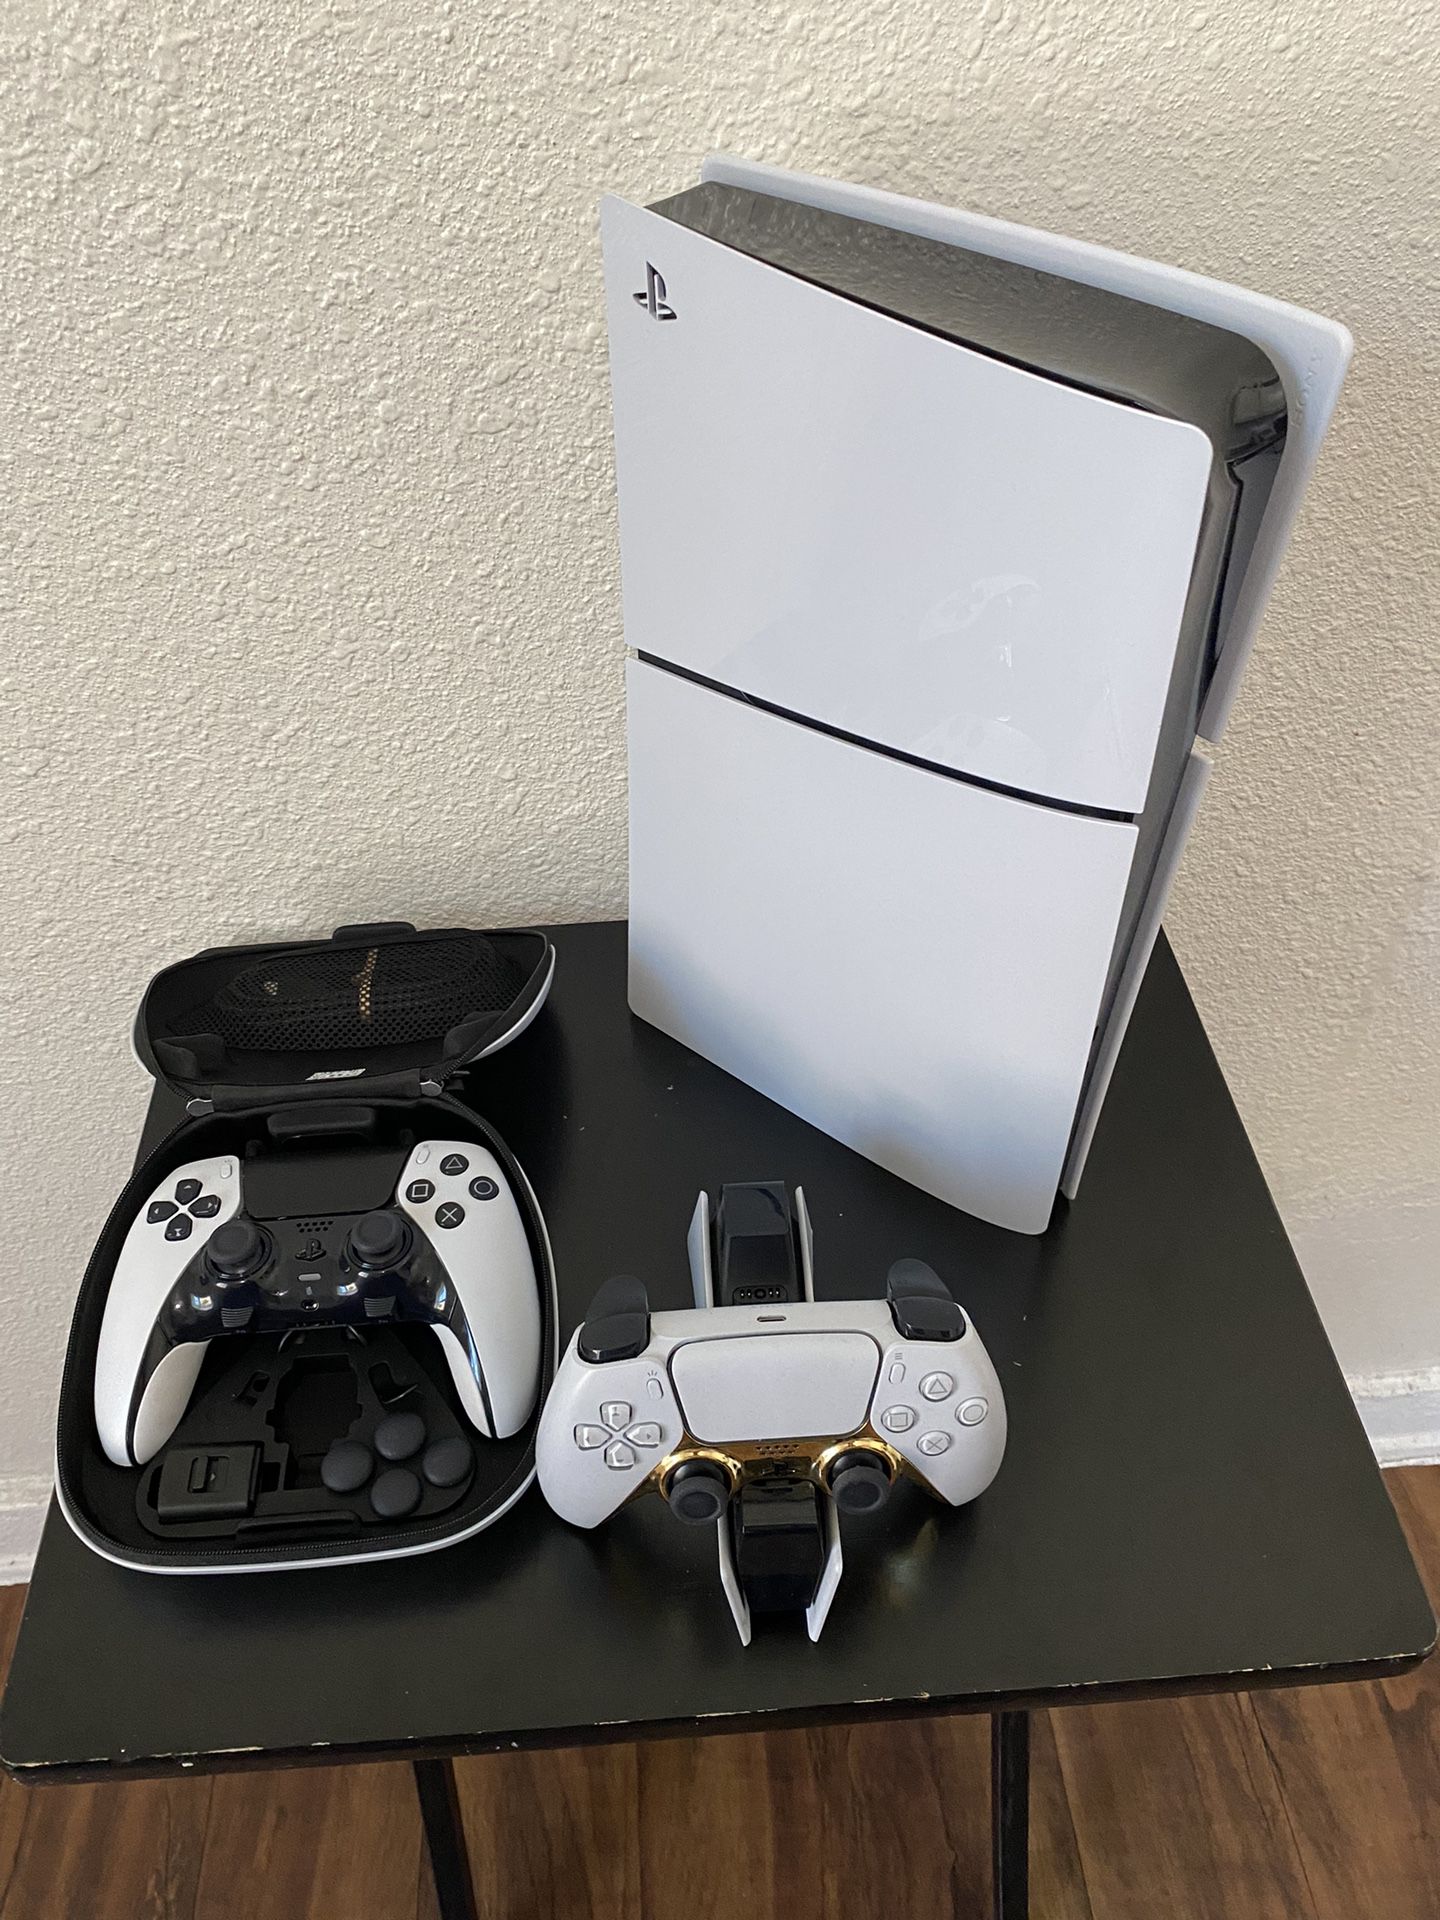 ps5 slim with pro controller and case